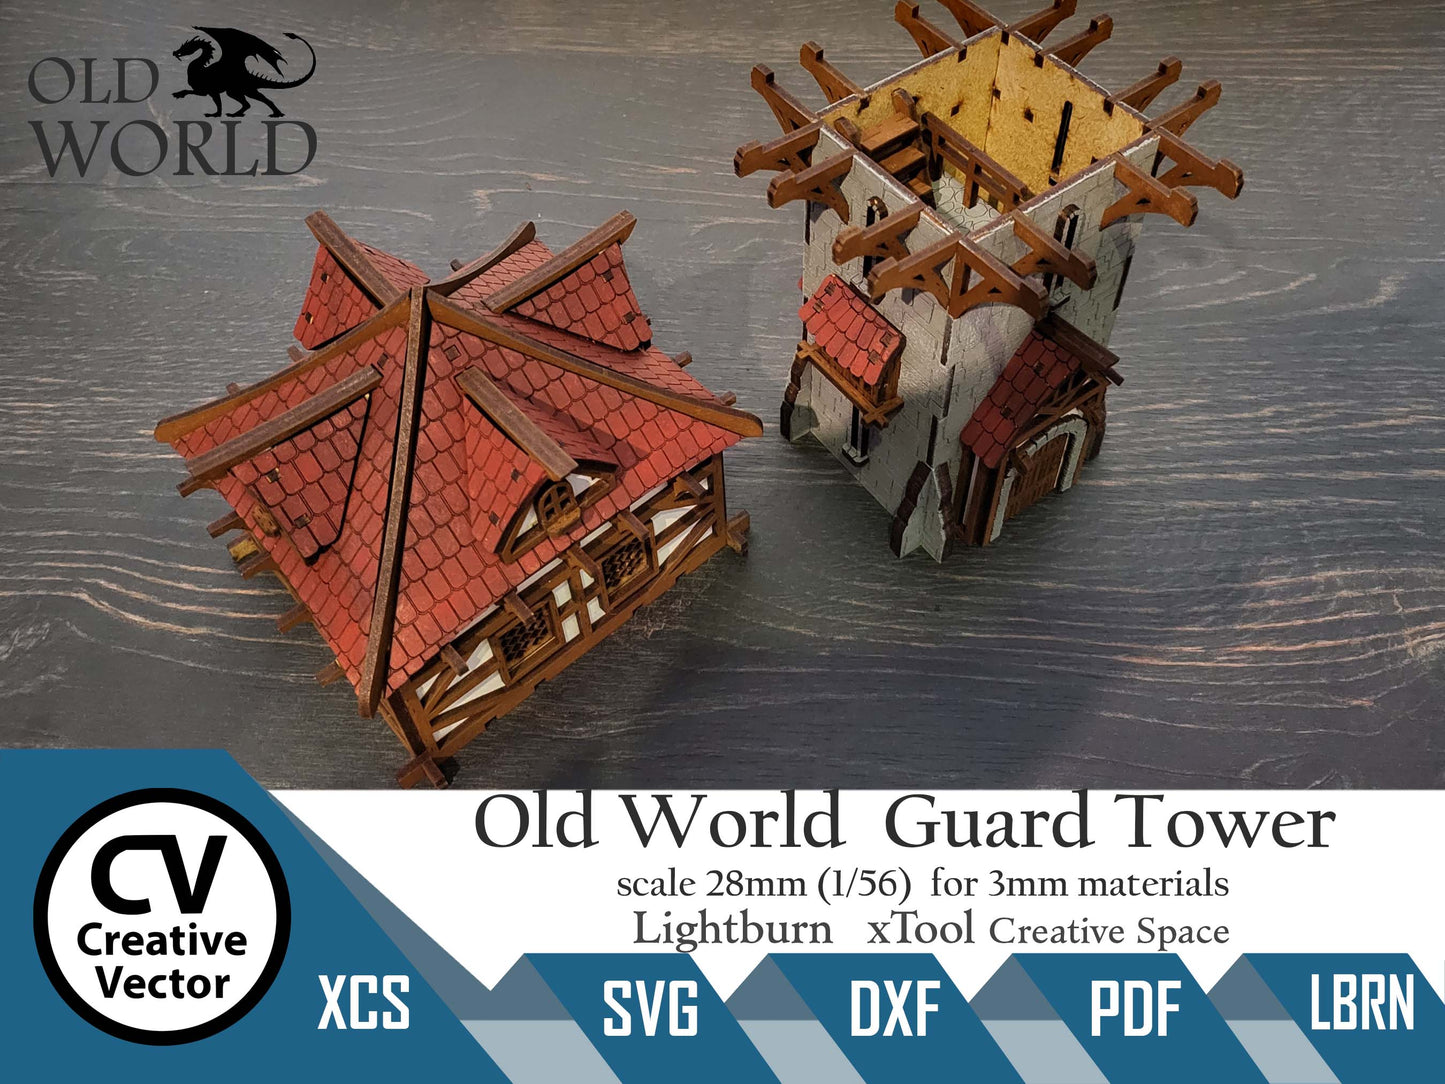 Old World Guard Tower in scale 28 mm